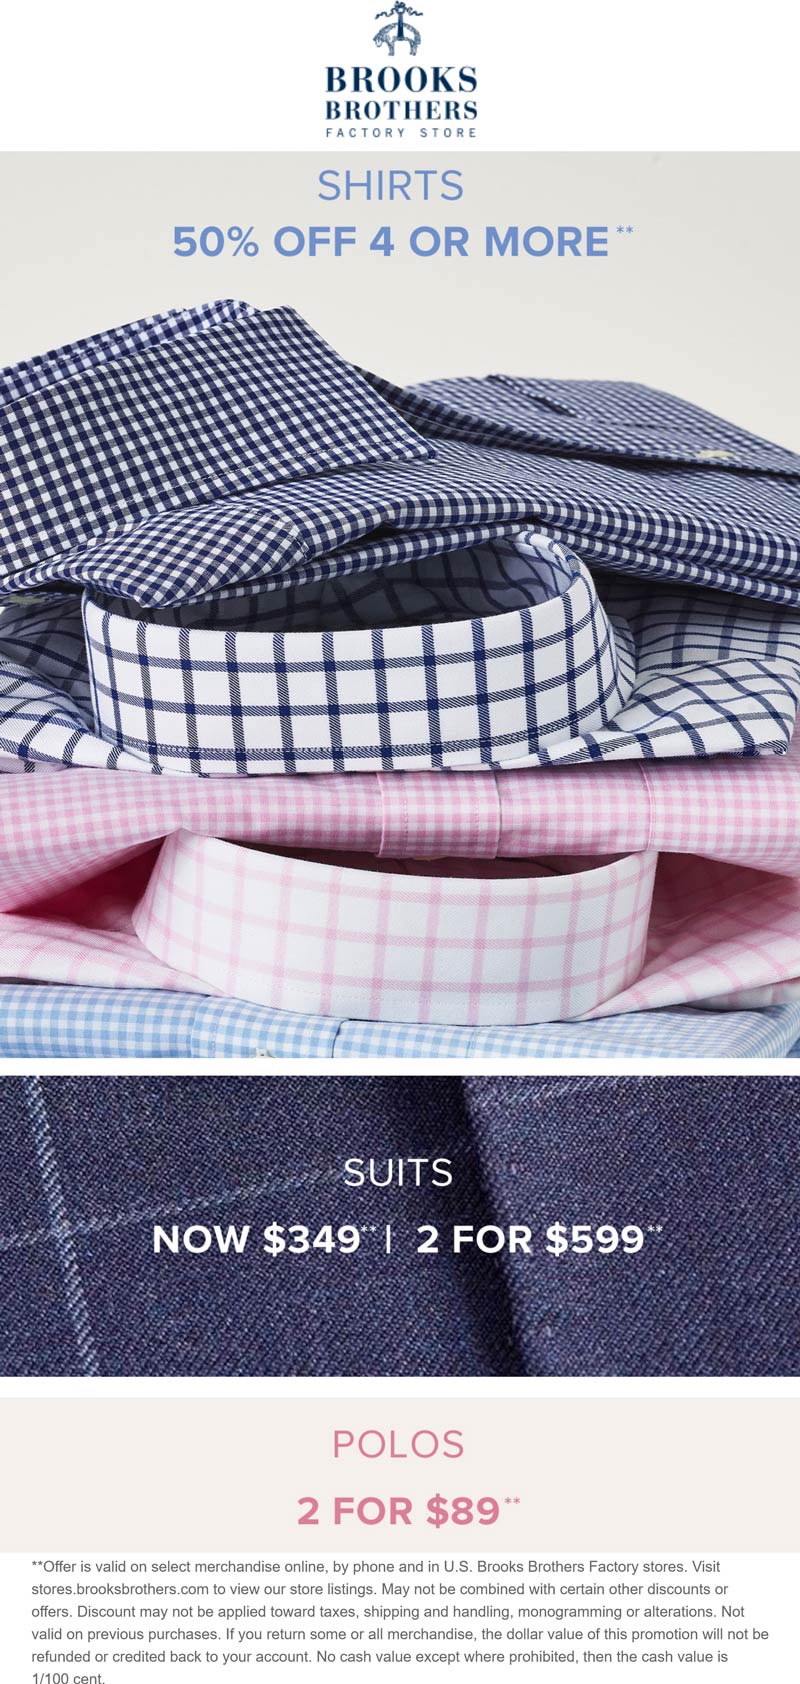 Brooks Brothers Factory stores Coupon  50% off 4+ shirts & more at Brooks Brothers Factory Store #brooksbrothersfactory 